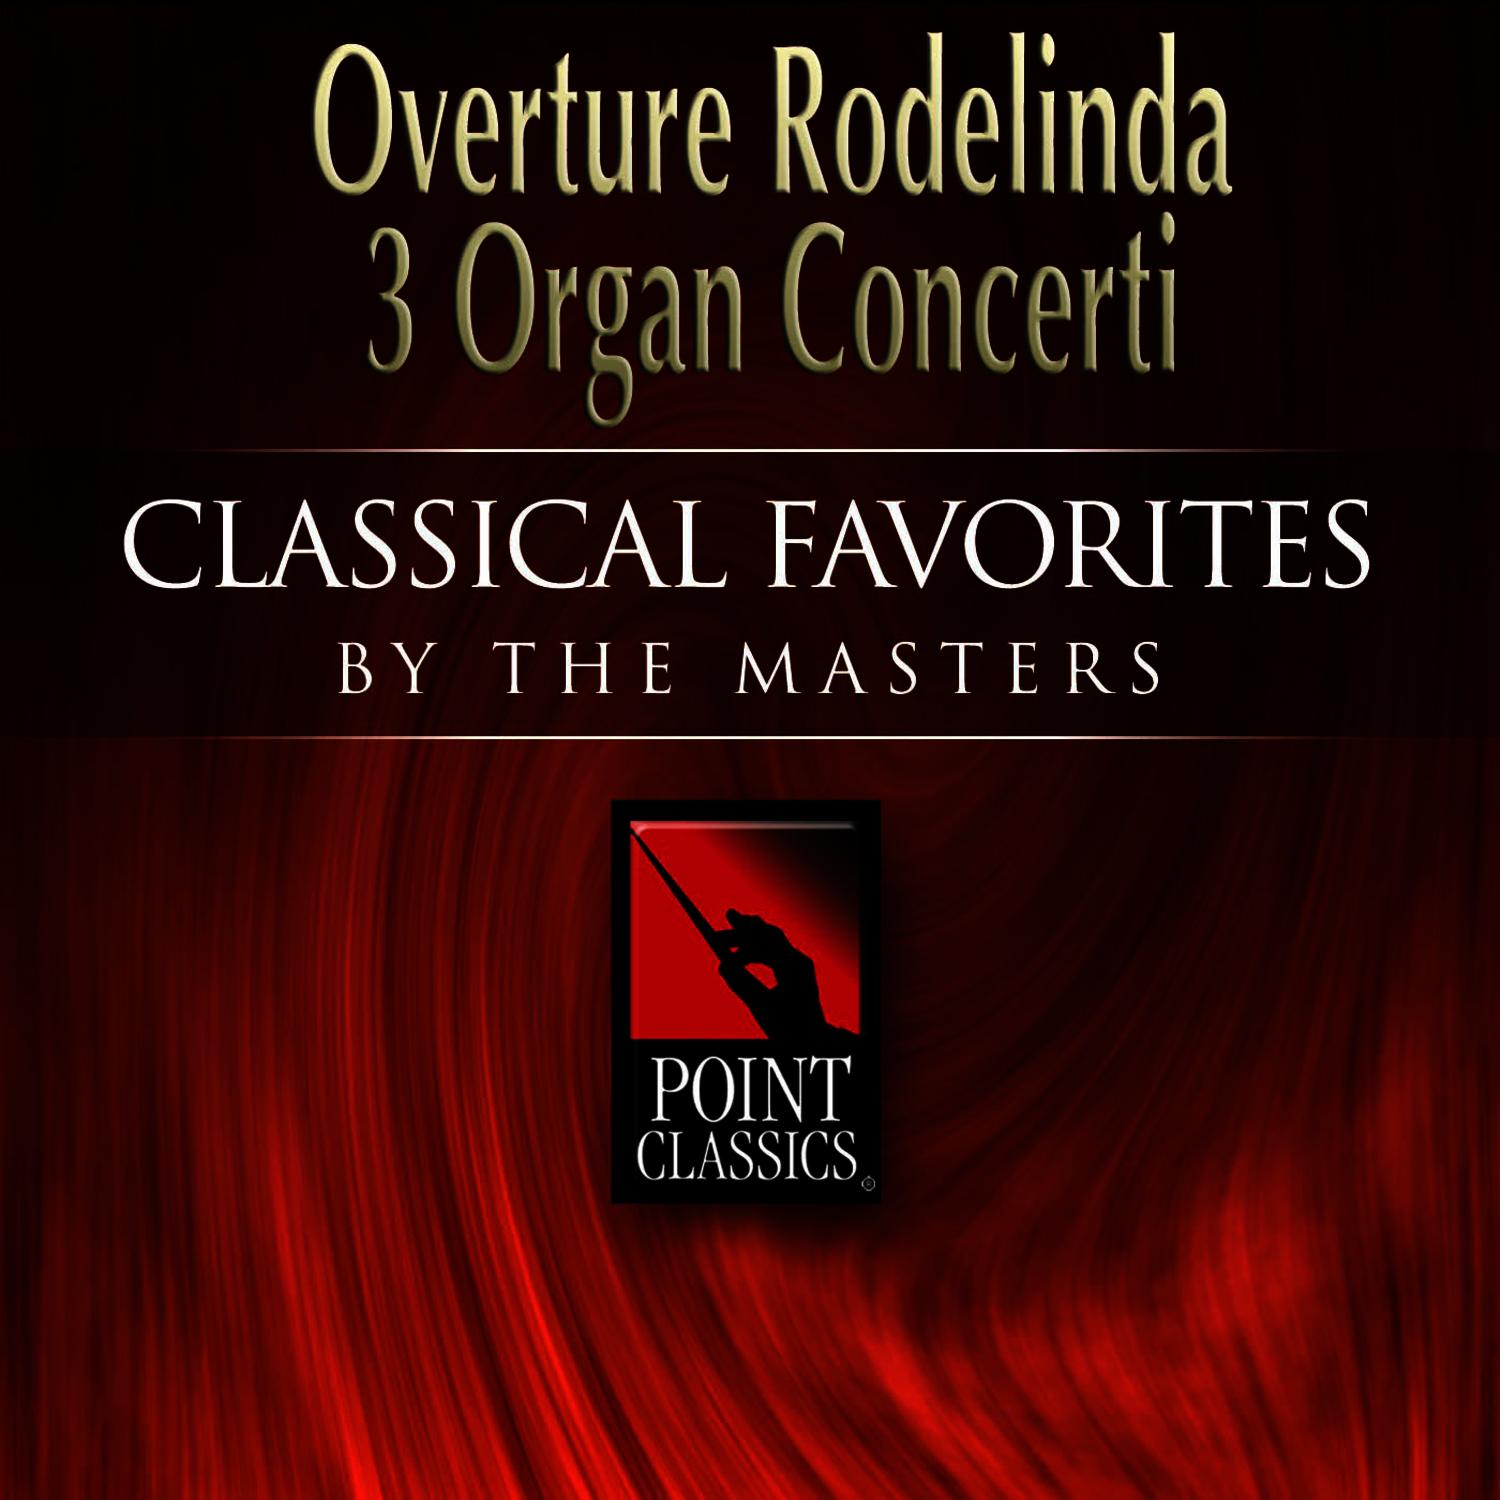 Concerto for Organ and Orchestra, No. 13 in F Major, Op. 4 The Cuckoo and the Nightingale : Allegro